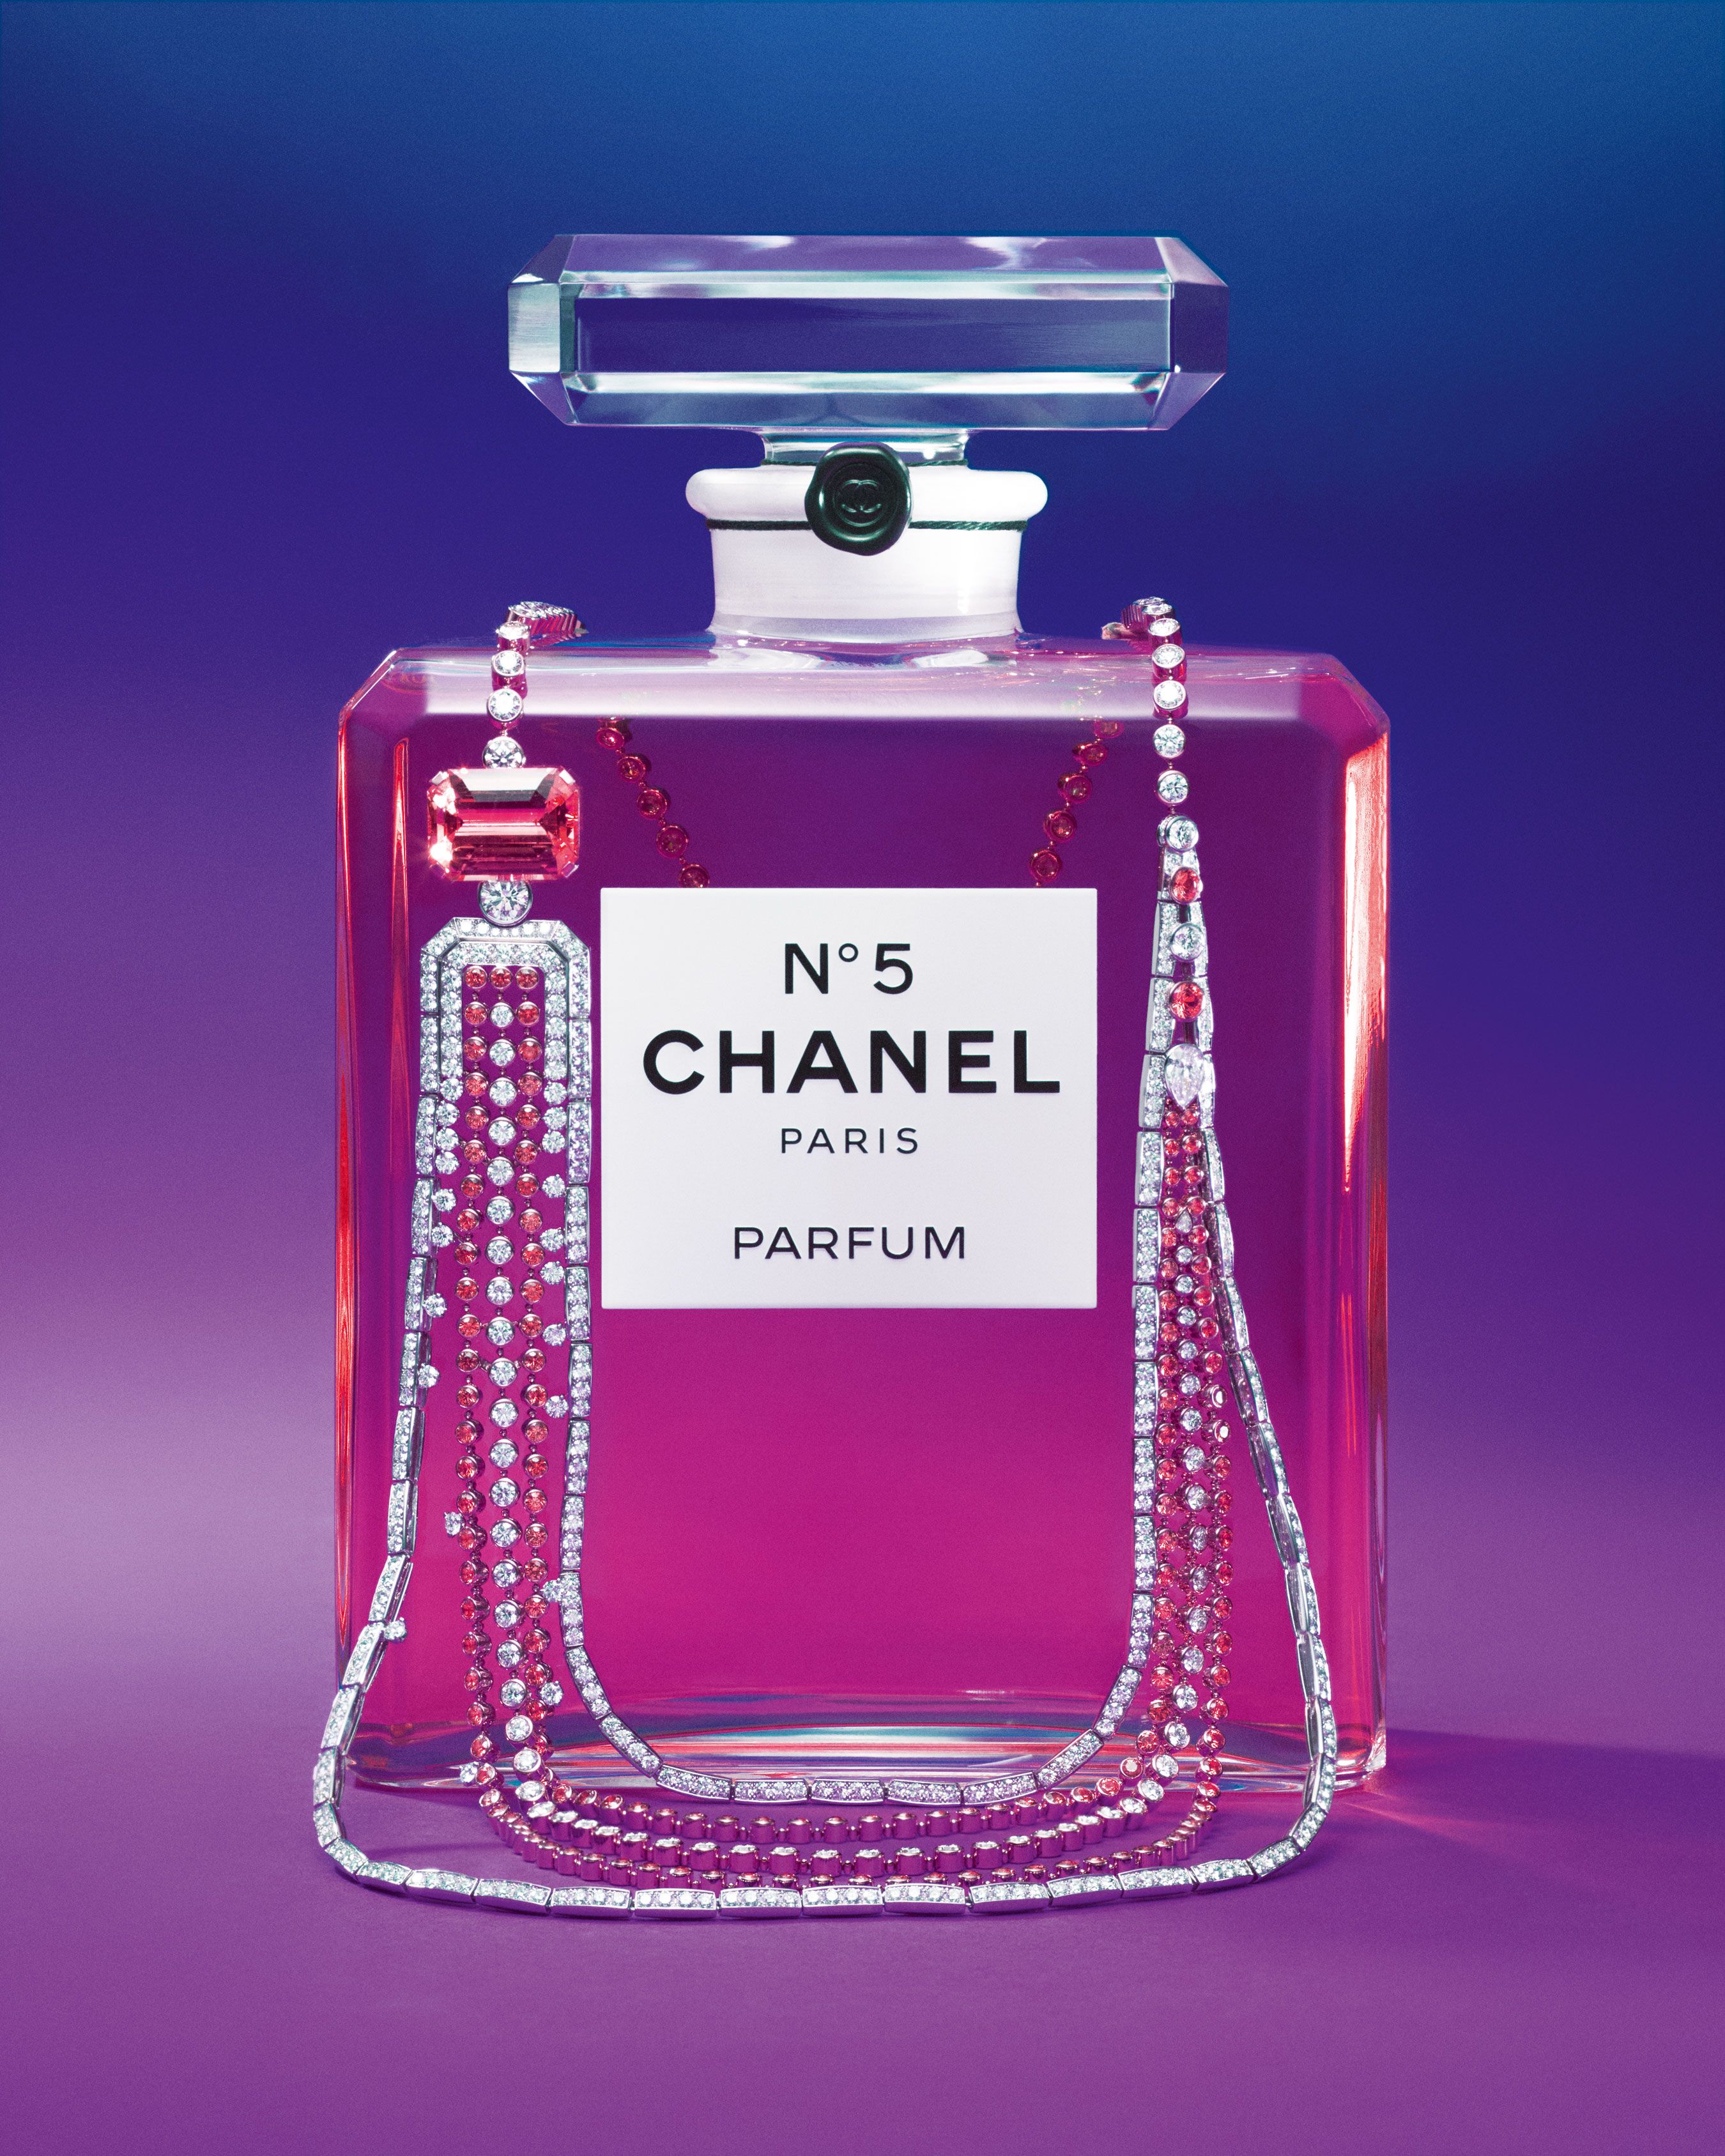 History of Chanel No. 5 - Perfume Stayed on Top